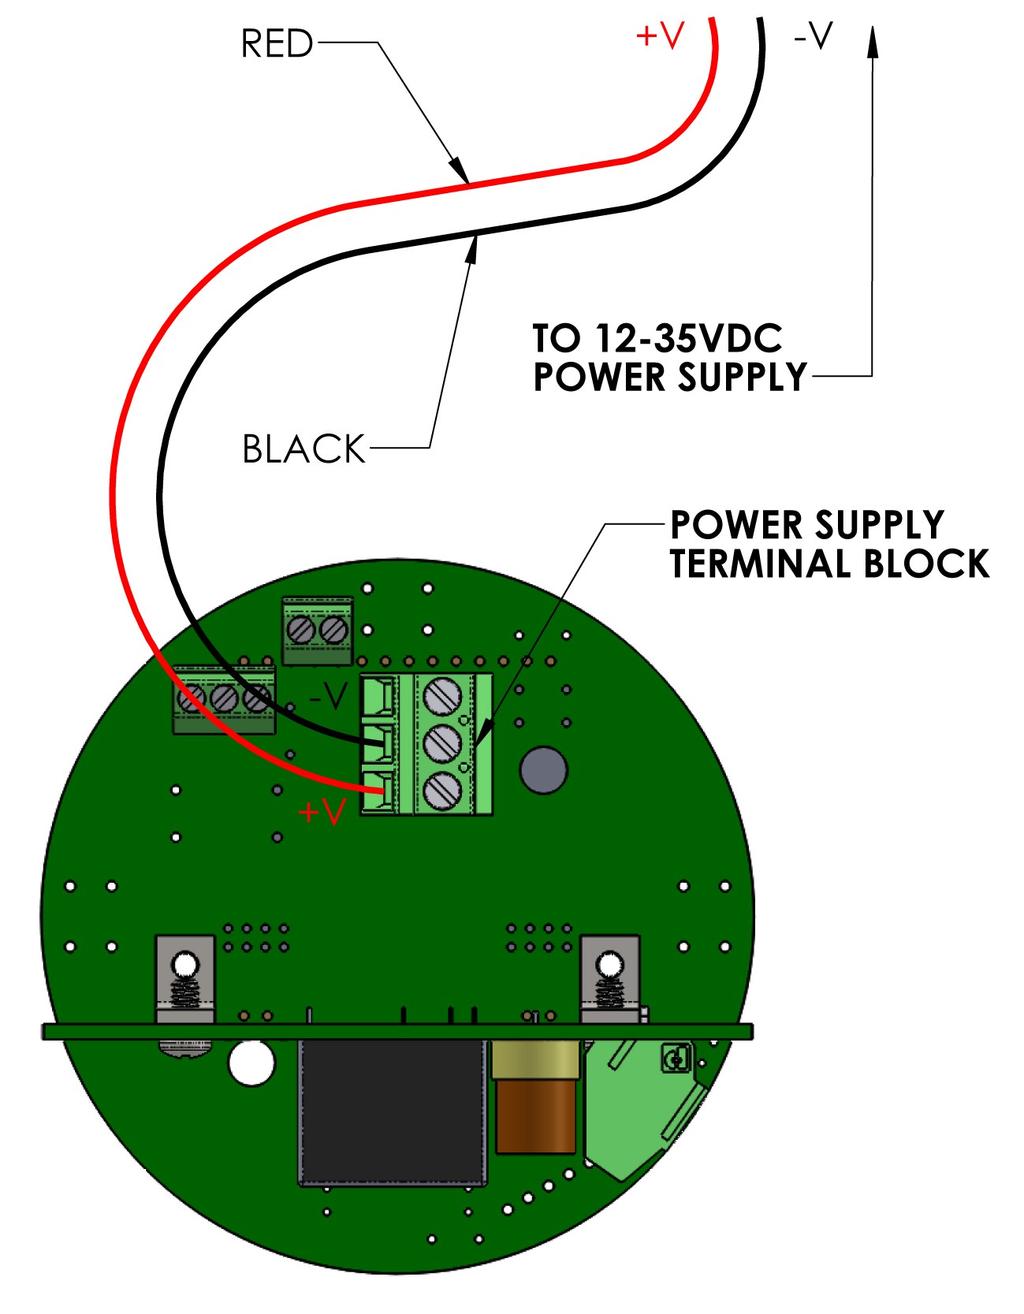 DC Power Supply Configuration If DC Power is to be used, please use the following wiring configuration instructions.